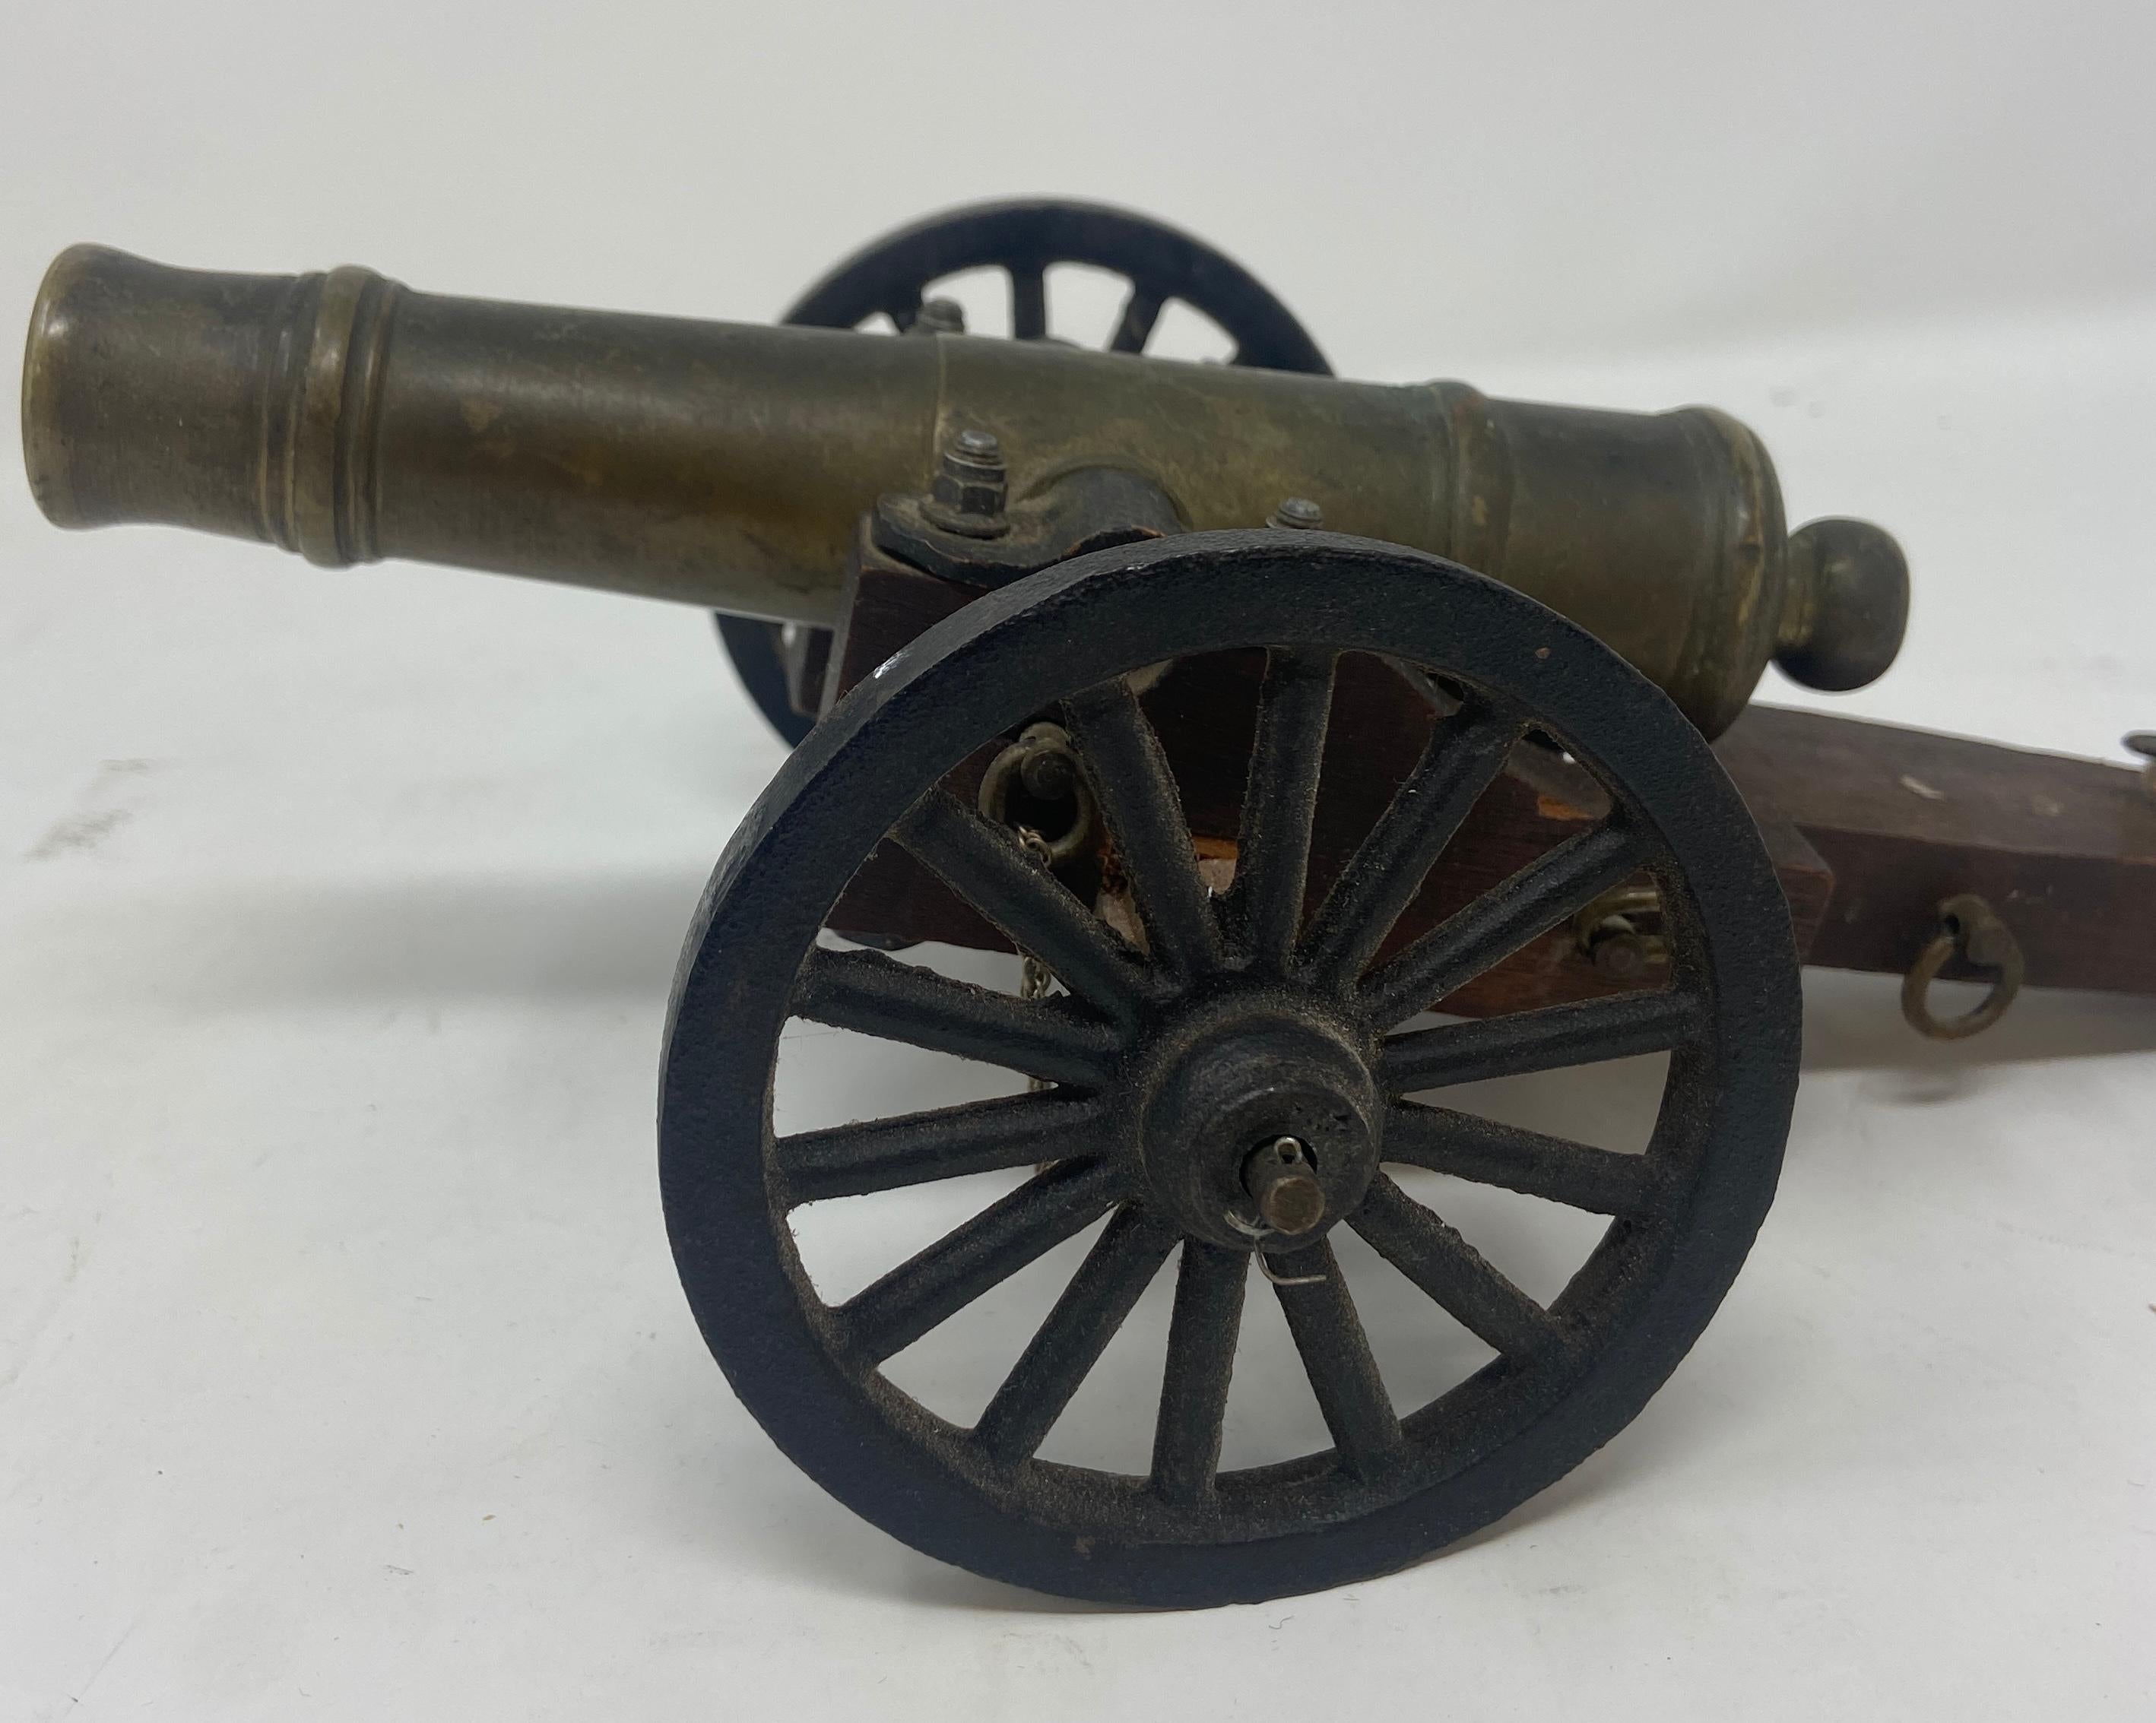 Estate Solid Bronze Top Miniature Model Military Cannon on a Wooden Carrier.
Cannon can roll an tilt up and down. Heavy, nice size miniature.